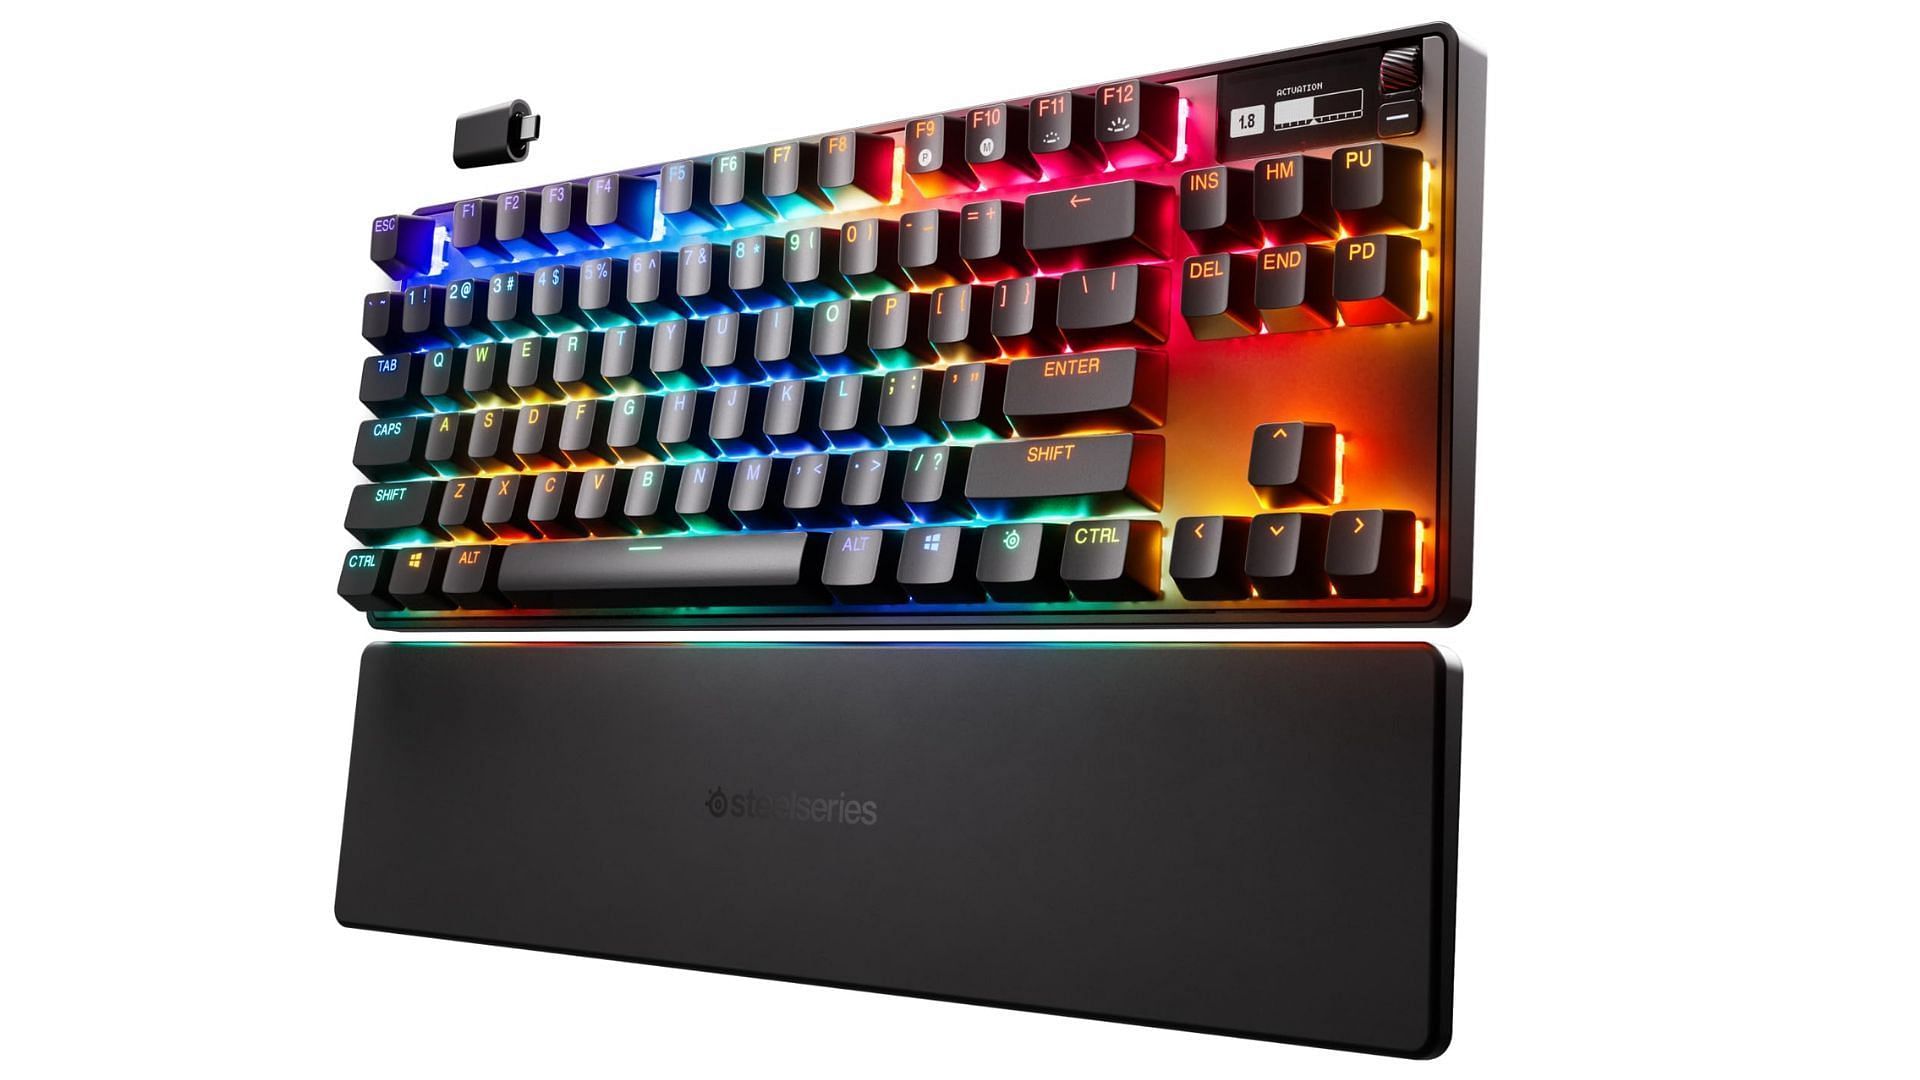 One of the best RGB gaming keyboards with Bluetooth support (Image via SteelSeries/Amazon)